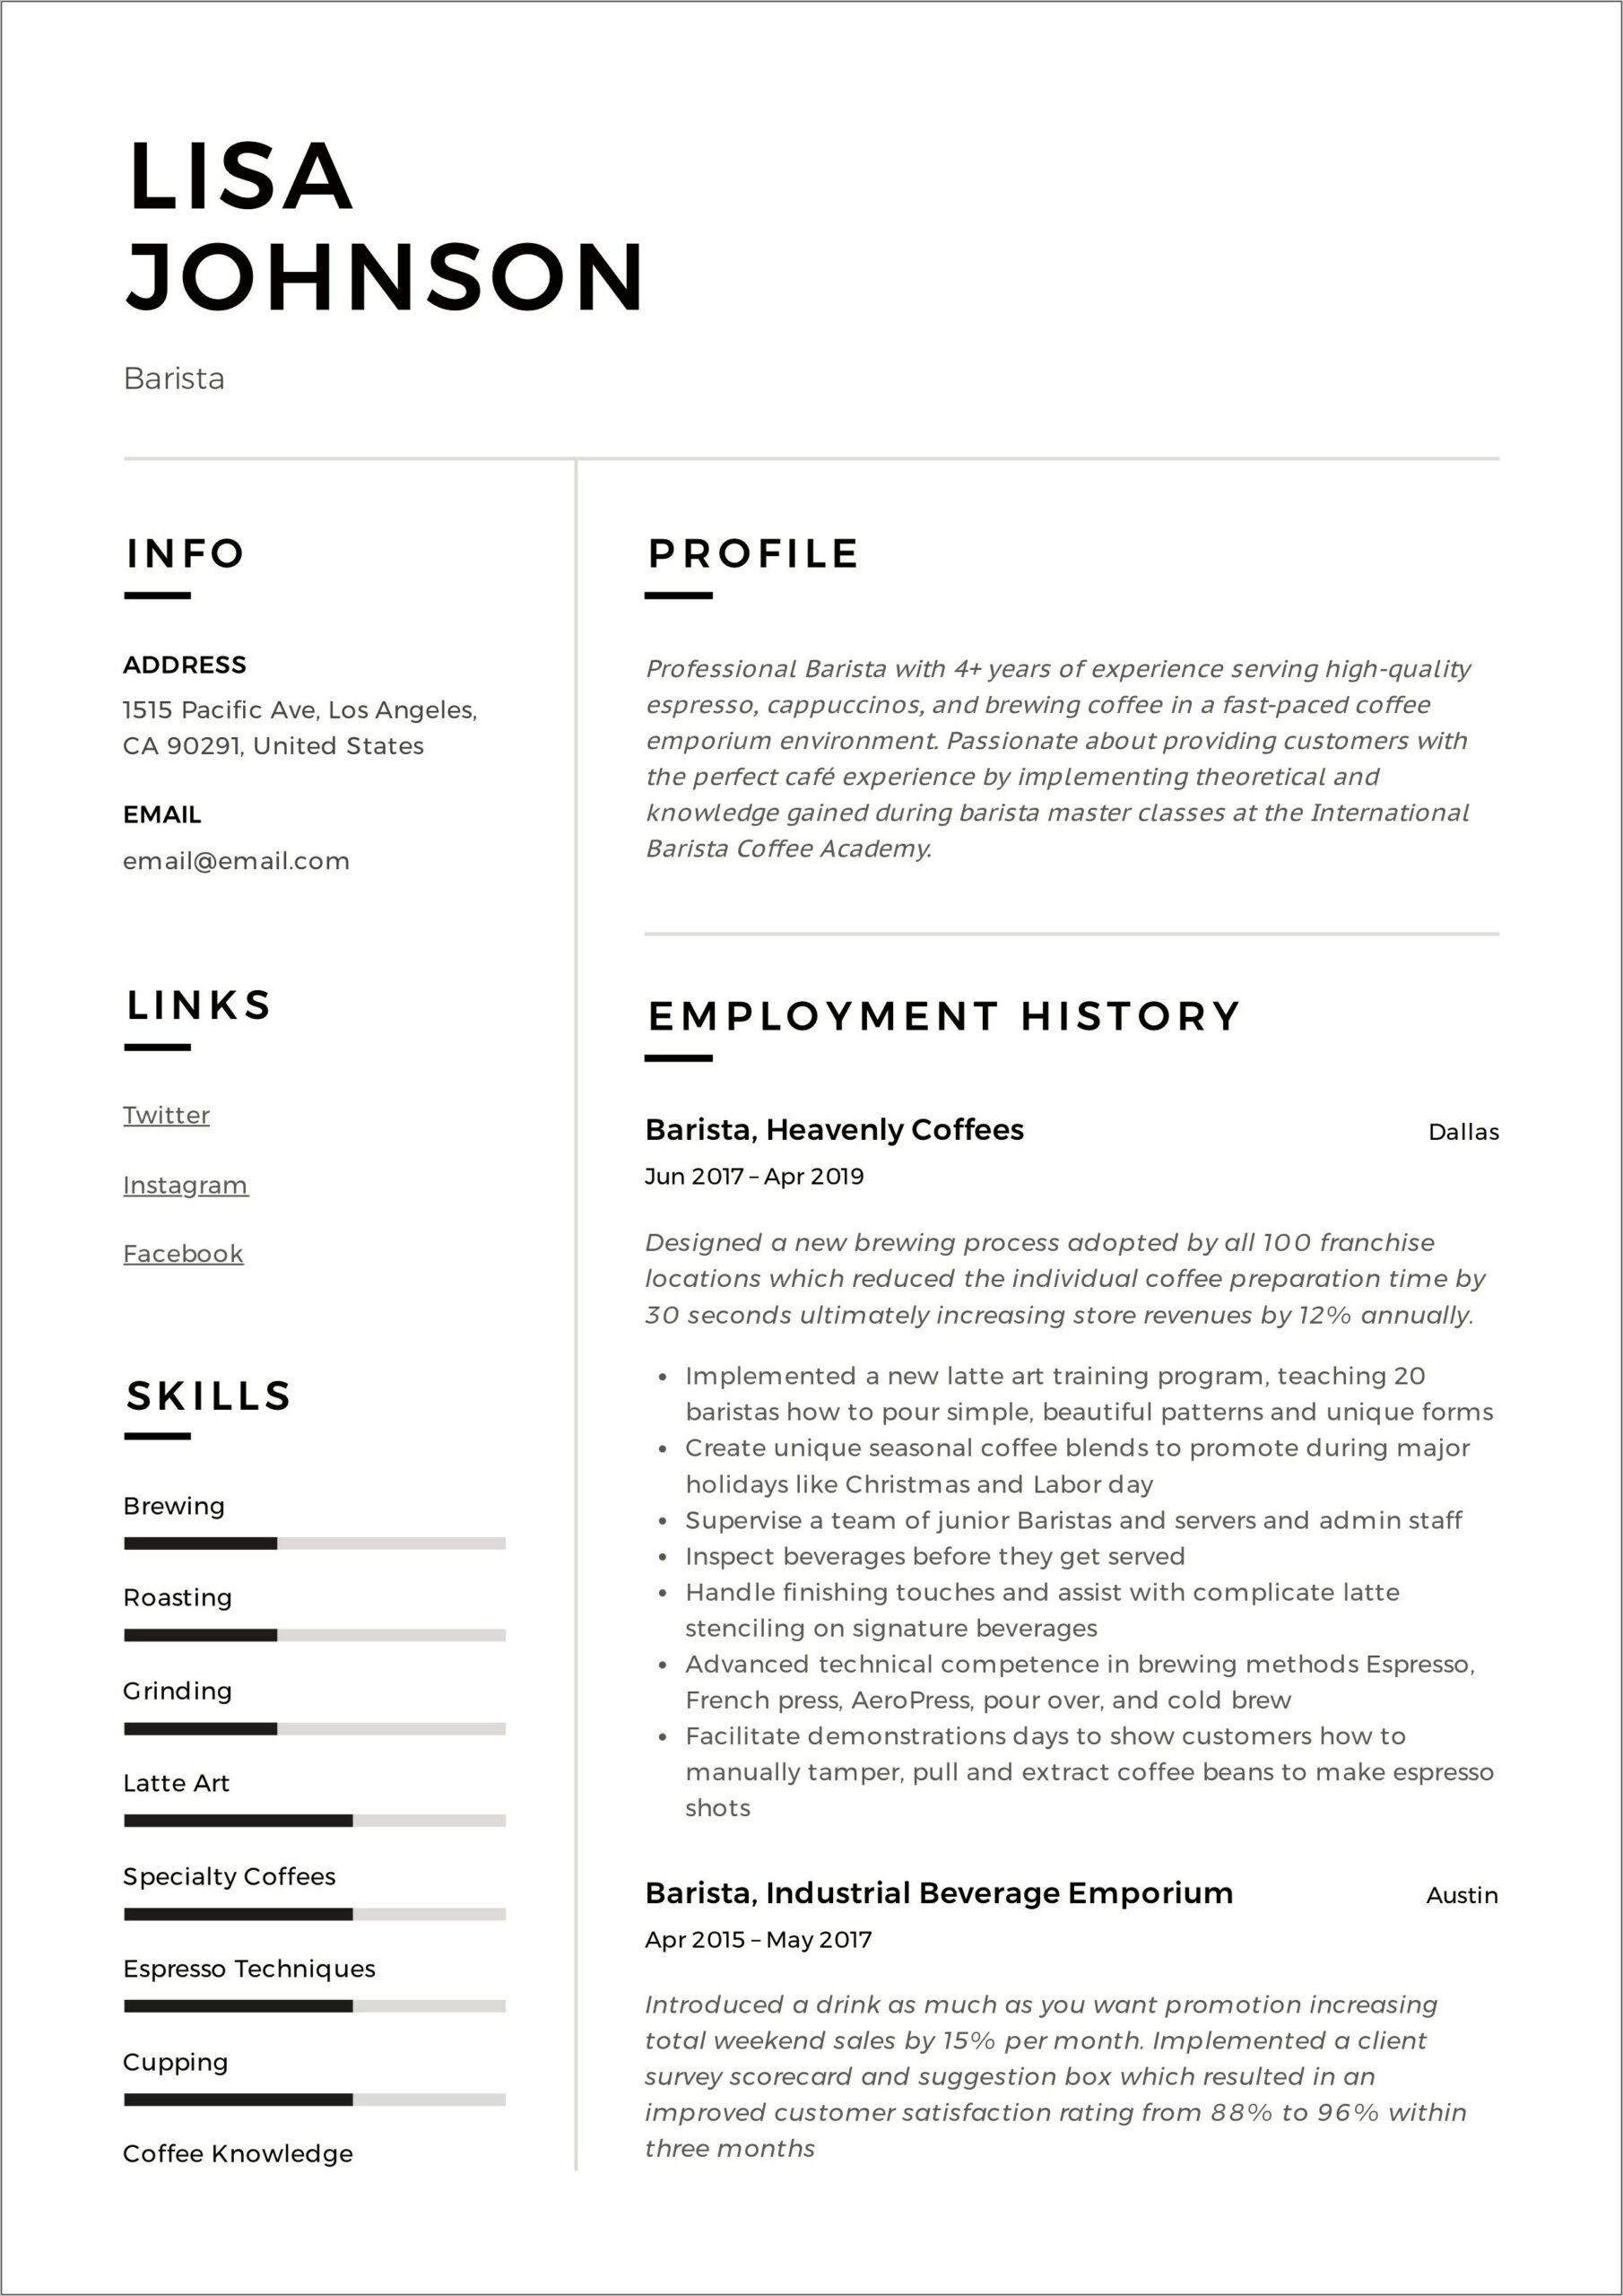 Resume Objective Examples For Barista